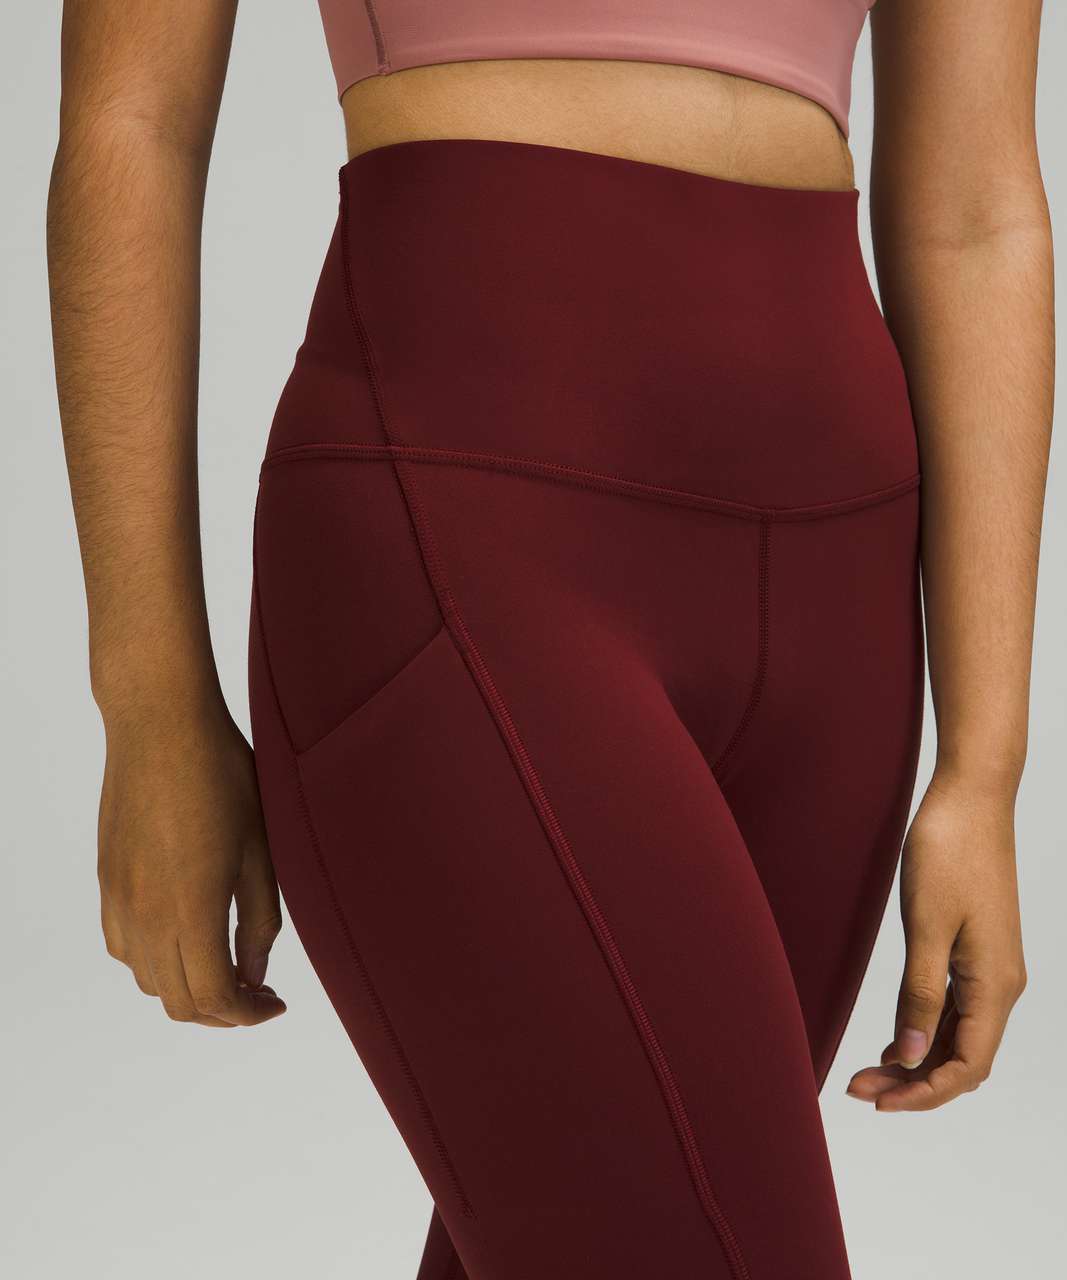 NWT Lululemon Align High-Rise Pant with Pockets 25 Red Merlot